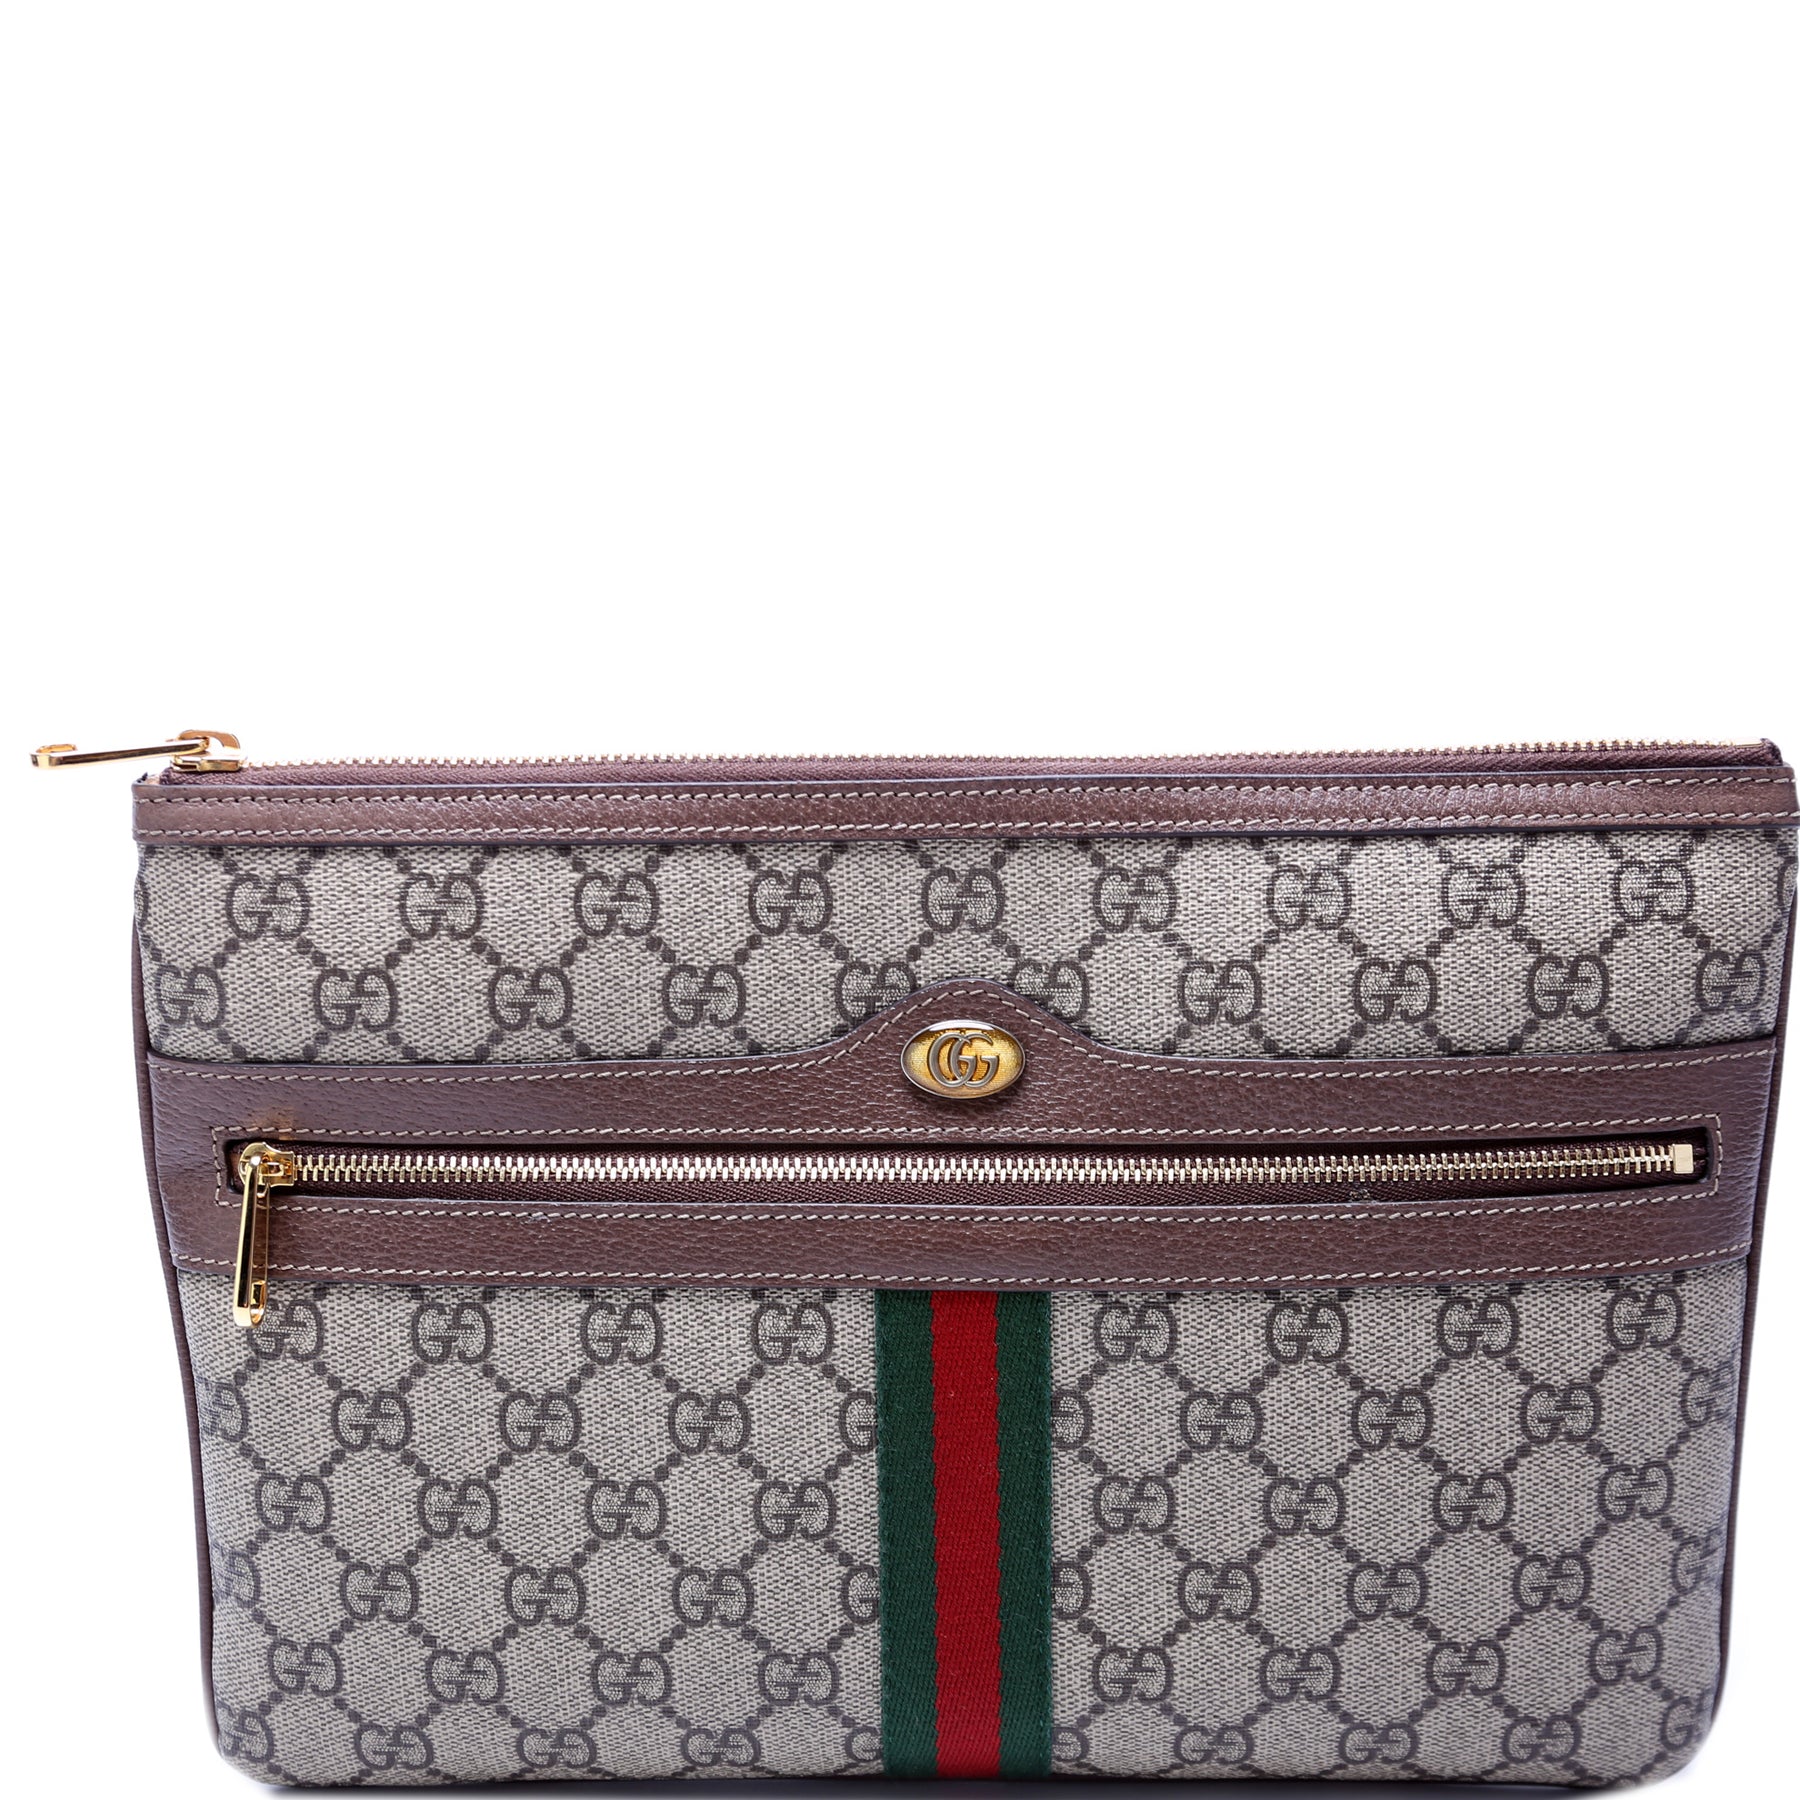 GUCCI Large Ophidia GG Leather Pouch Clutch Bag Black 517551